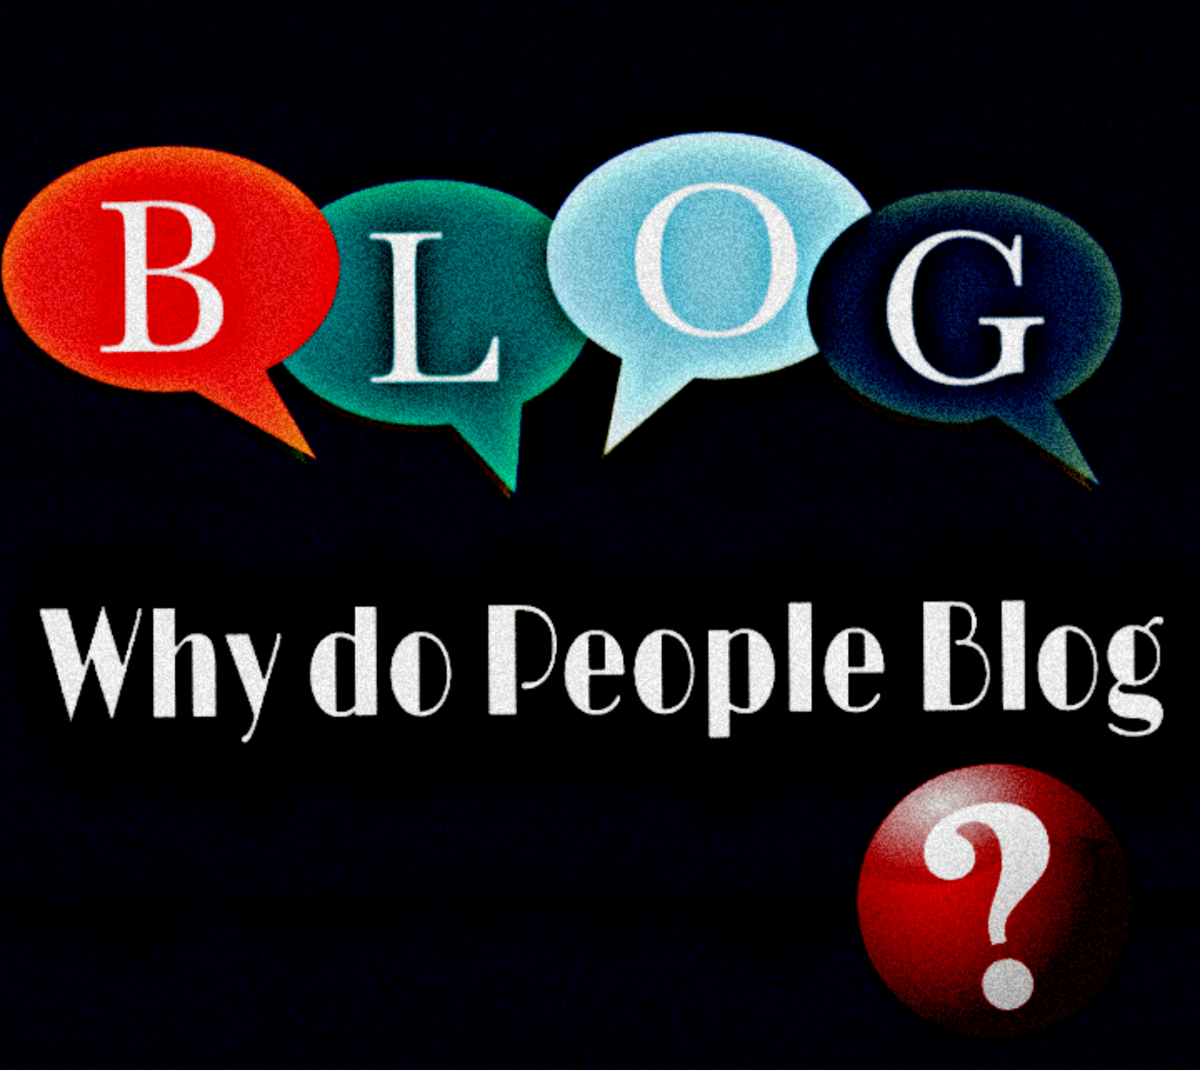 What is Blogging and Why do People Blog?